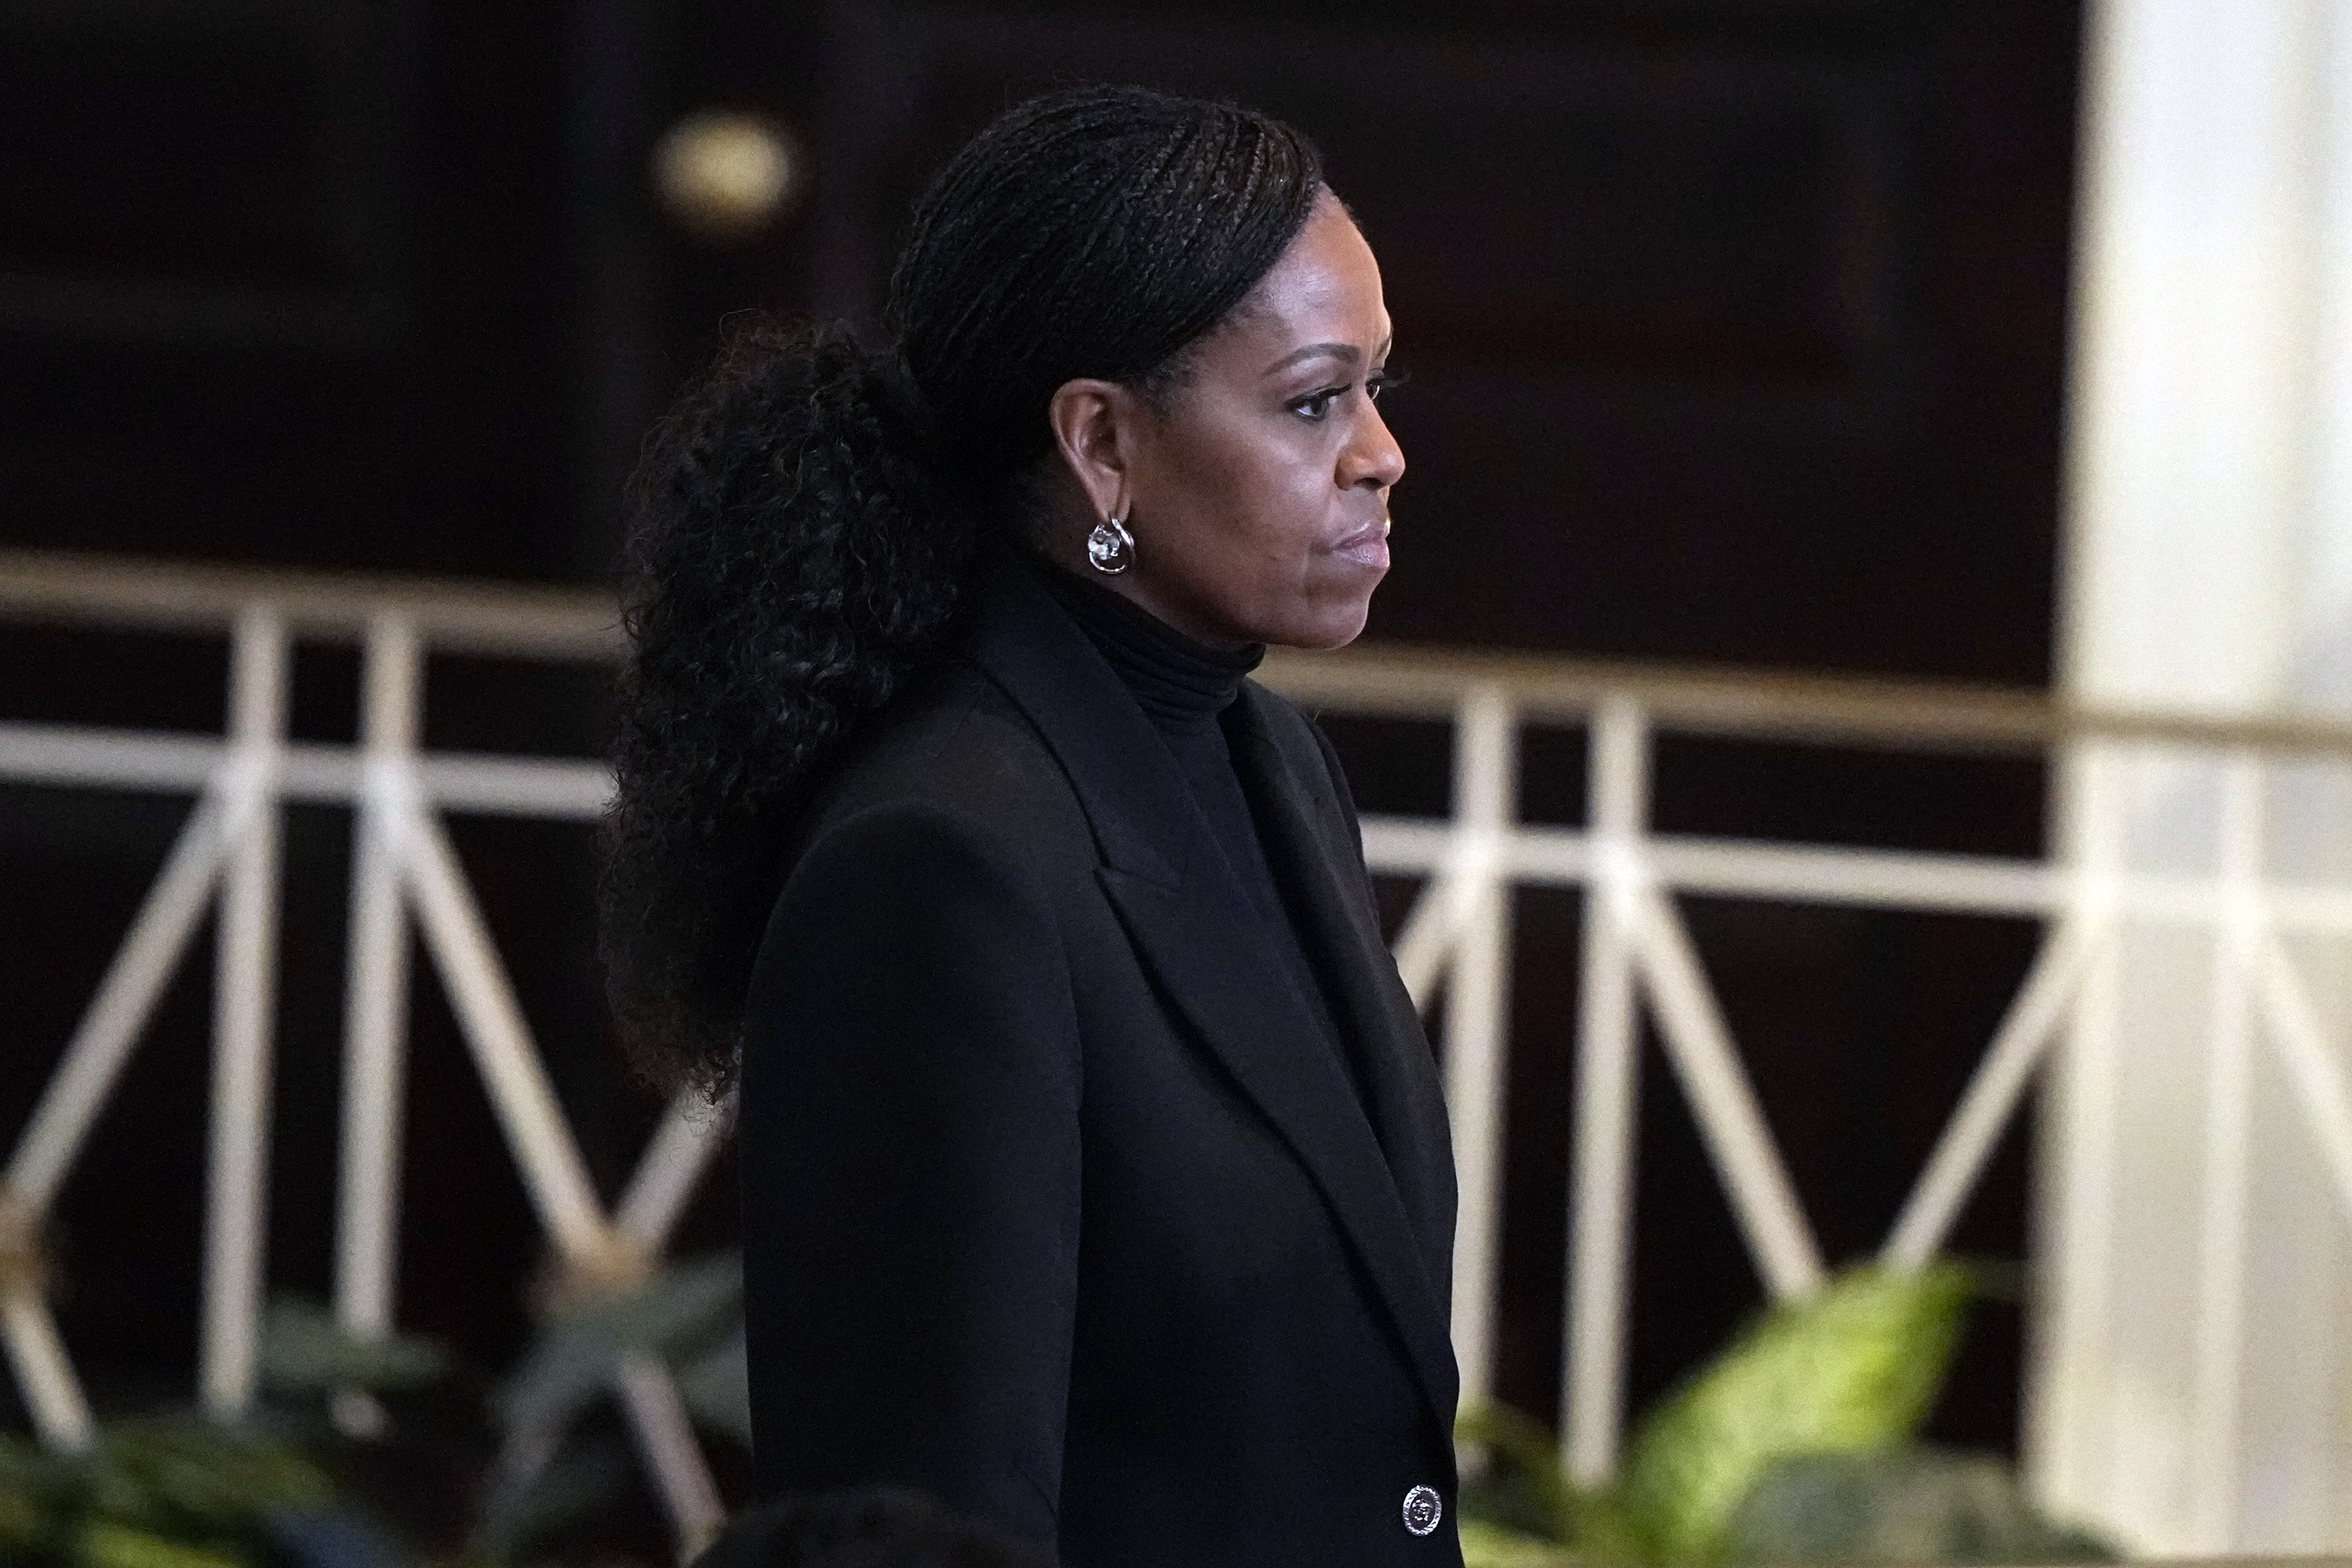 Former U.S. First Lady Michelle Obama at former U.S First Lady Rosalynn Carter's tribute service in Atlanta, Georgia on November 28, 2023 | Source: Getty Images